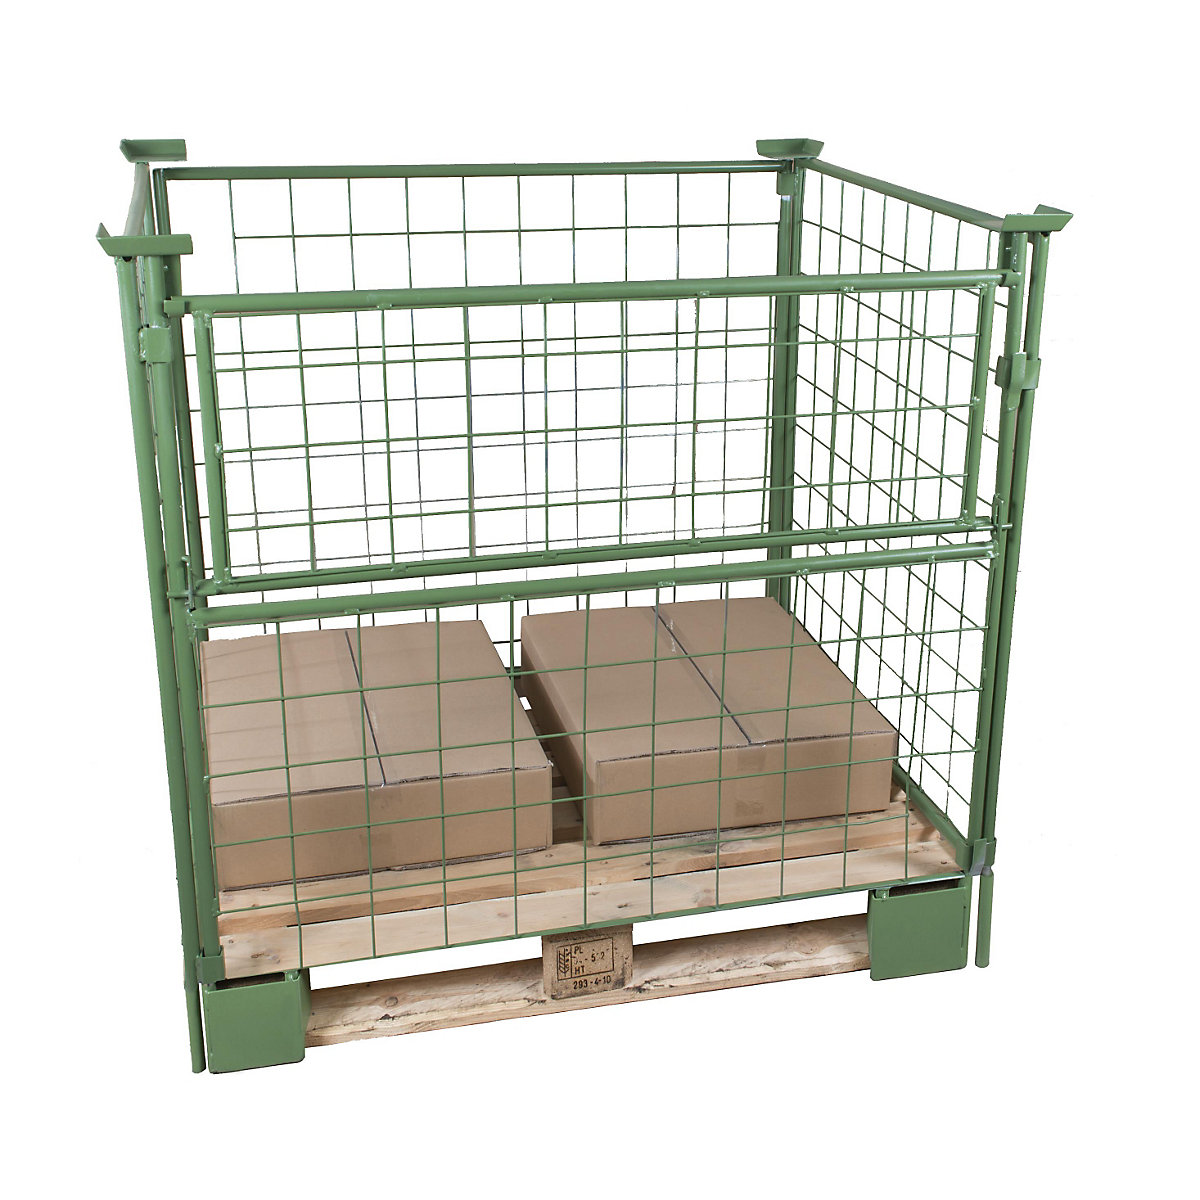 Pallet frame, effective height 1000 mm, for attaching, WxL 800 x 1200 mm, 1 long side can be half folded